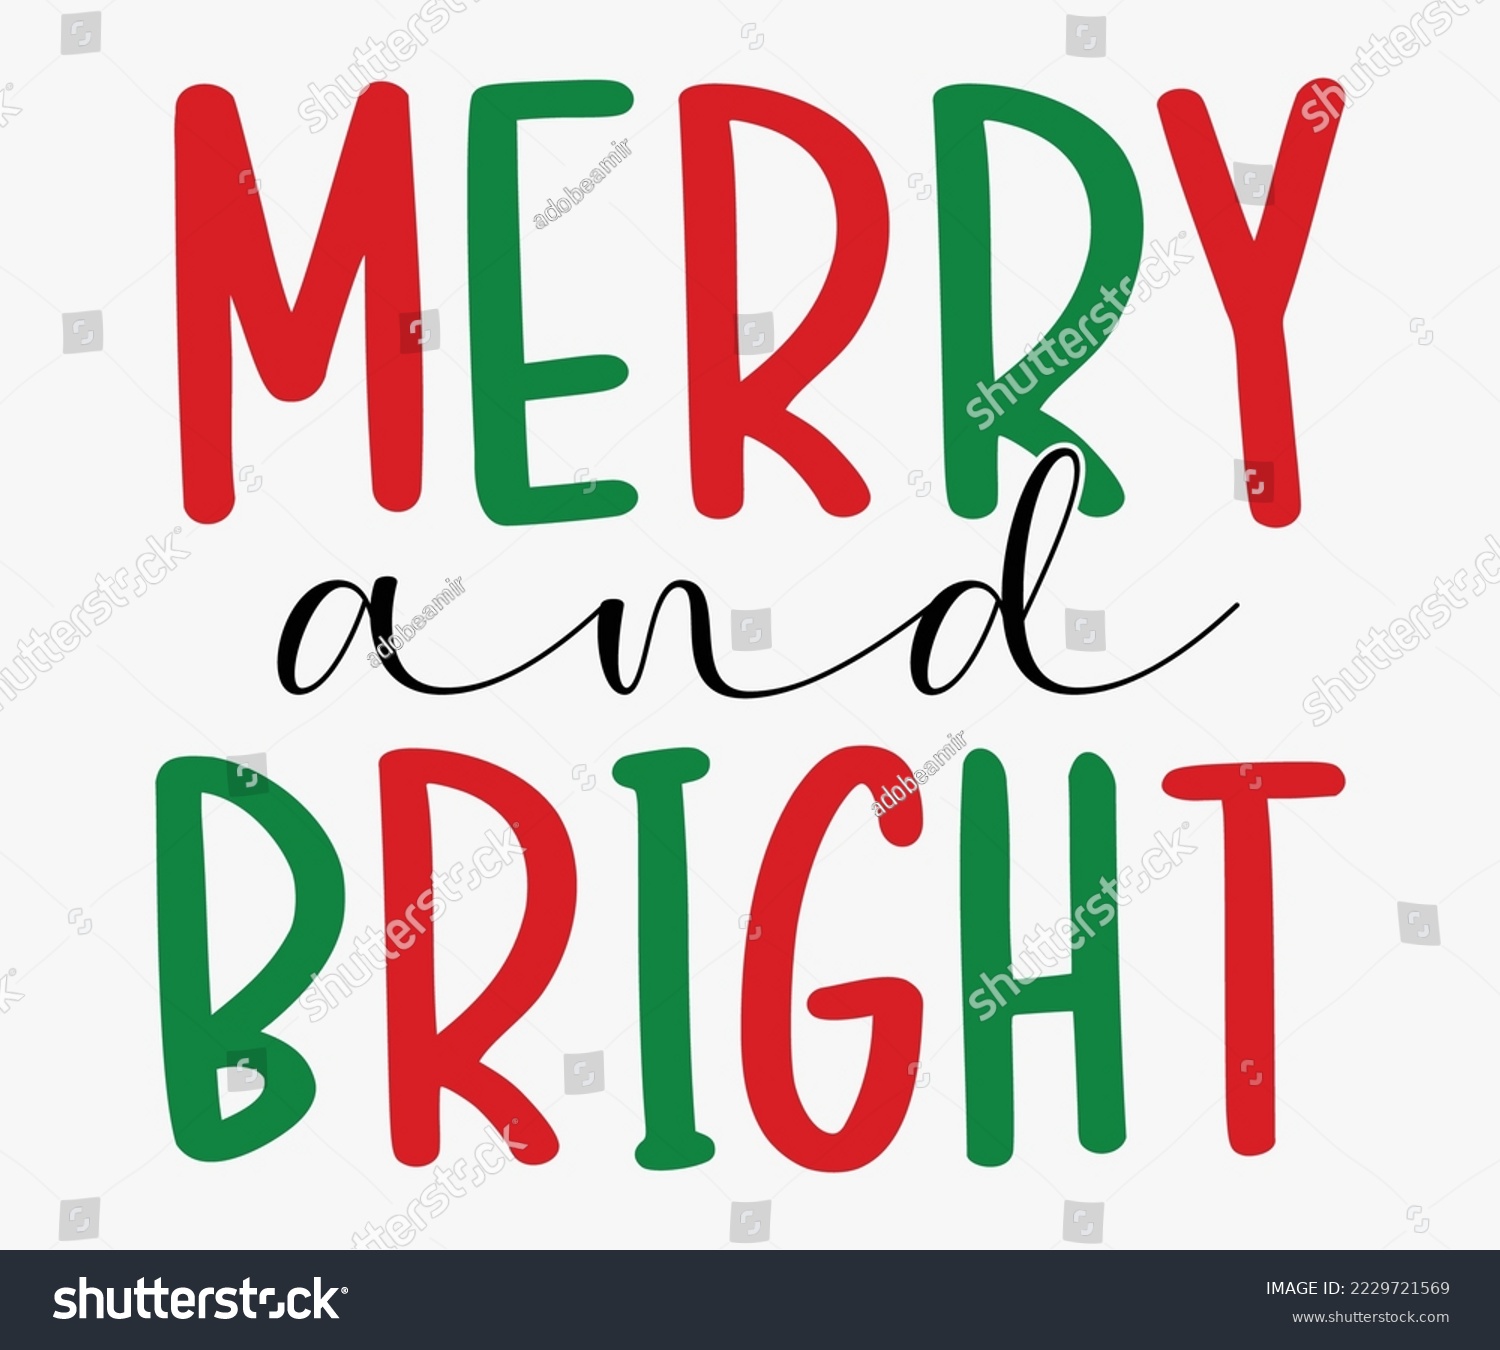 SVG of Merry and Bright SVG, Christmas SVG Design, Merry Christmas T-shirts, Funny Christmas Quotes, Winter Quote, Christmas Saying, Holiday SVG T-shirt, Santa Claus Hat, New Year SVG, Snowflakes Files svg